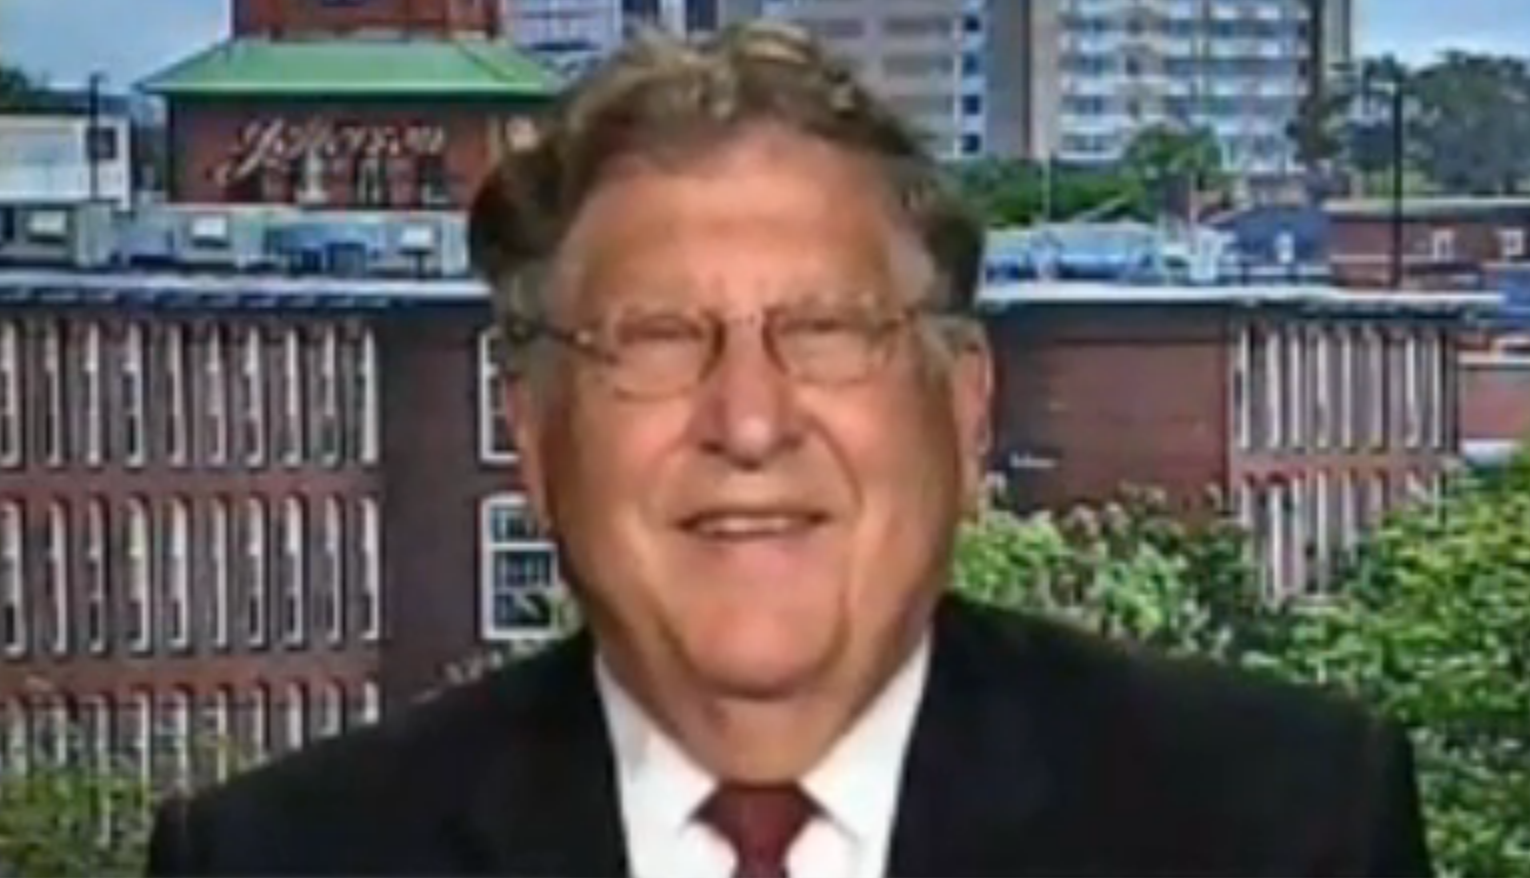 Exclusive – Sununu: Media's Bain Attacks 'Unethical and Slimy'